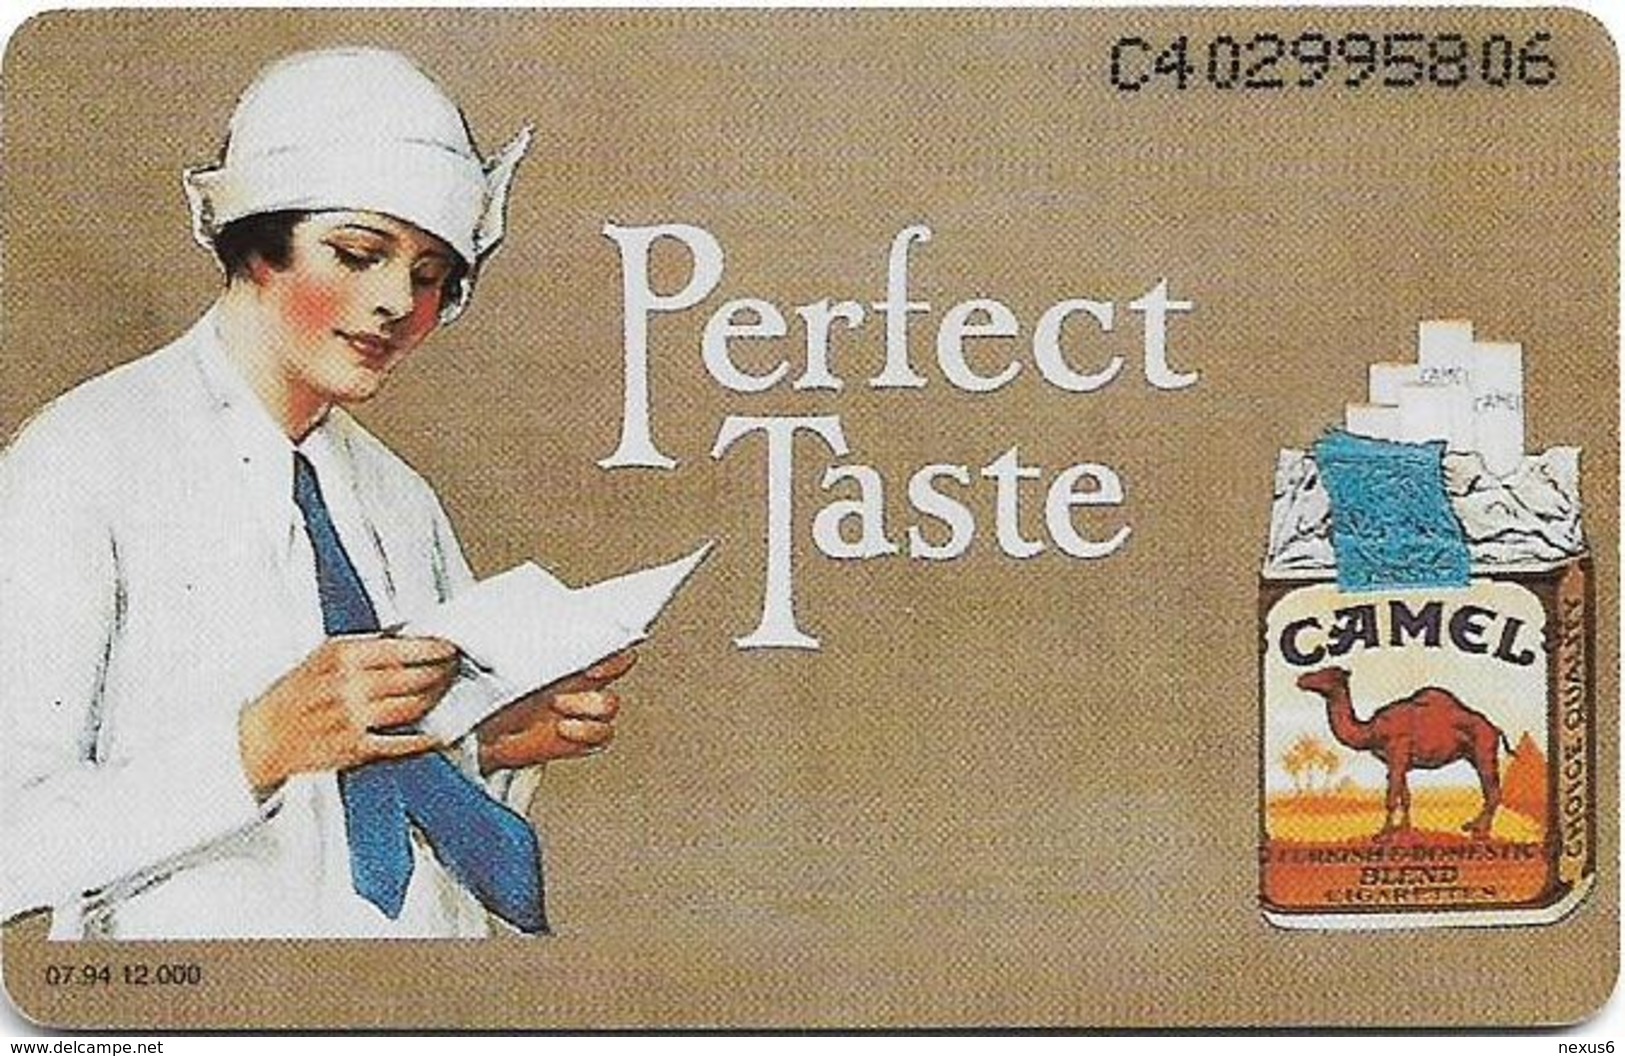 Netherlands/Germany (Cooperation) - Camel... Perfect Taste, 2.5ƒ, 07.1994, 12.000ex, Used - Private